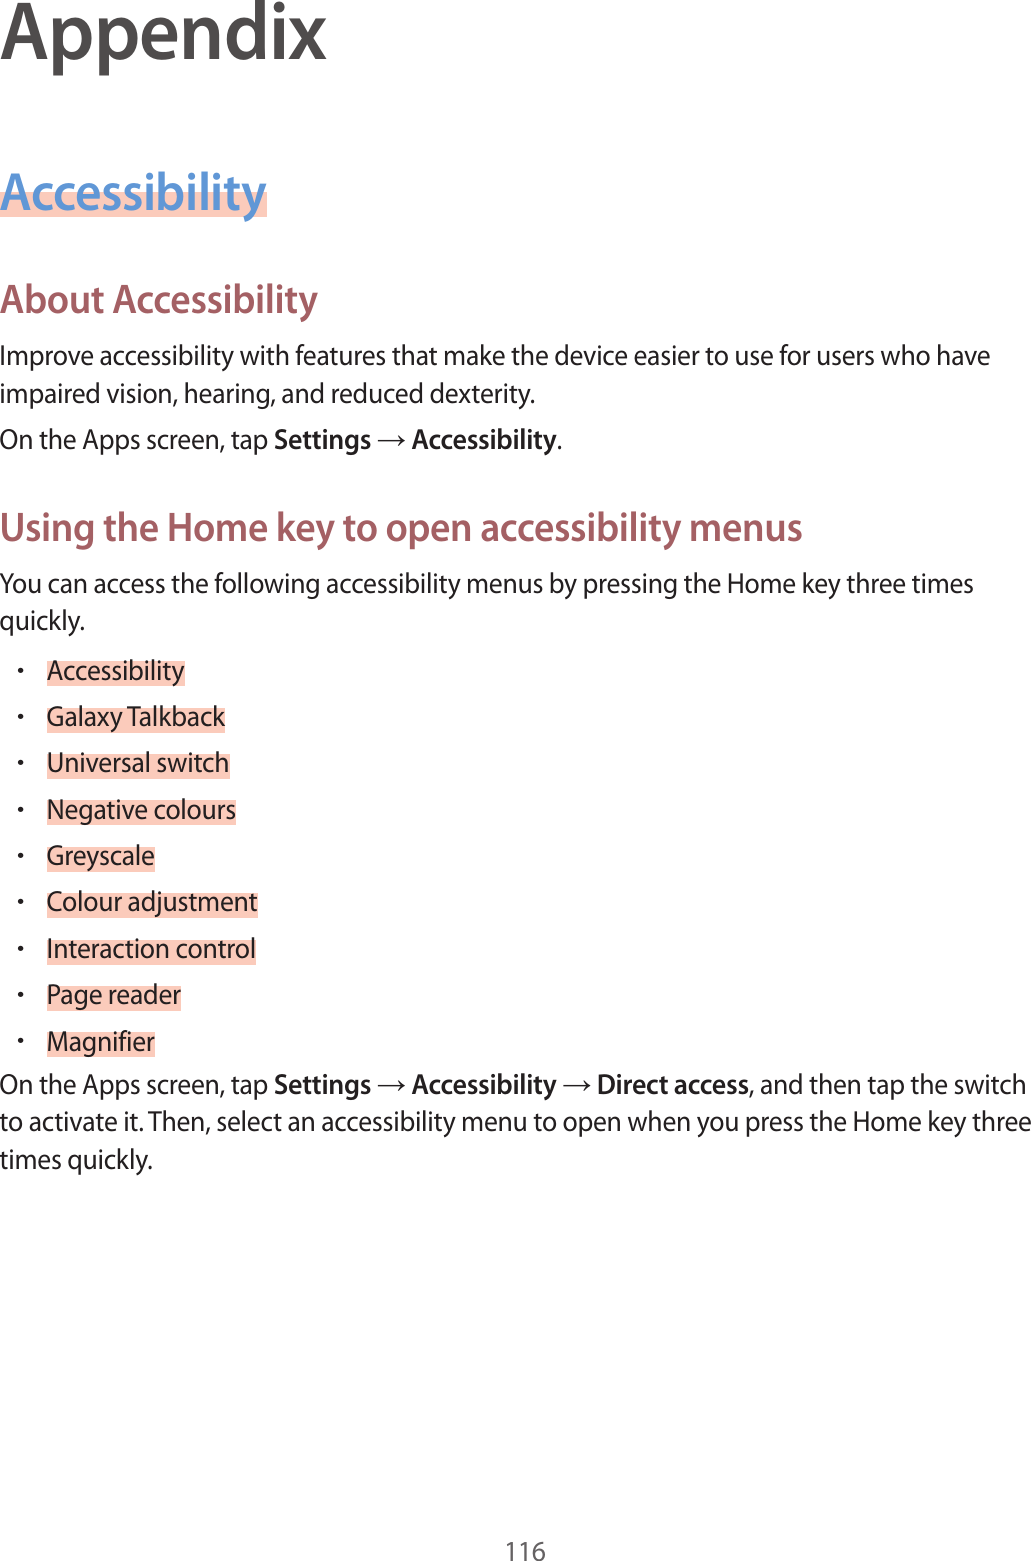 116AppendixAccessibilityAbout A c c essibilityImprove ac c essibility with featur es tha t make the device easier t o use f or users who ha v e impaired vision, hearing , and r educed de xterity.On the Apps screen, tap Settings  Accessibility.Using the Home k ey t o open ac c essibility menusYou can access the follo wing acc essibility menus by pr essing the Home key thr ee times quickly.•Accessibility•Galaxy T alkback•Universal switch•Negative c olours•Greyscale•Colour adjustment•Interaction control•P age r eader•MagnifierOn the Apps screen, tap Settings  Accessibility  Direct access, and then tap the switch to activate it. T hen, select an accessibility menu to open when you pr ess the Home key thr ee times quickly .